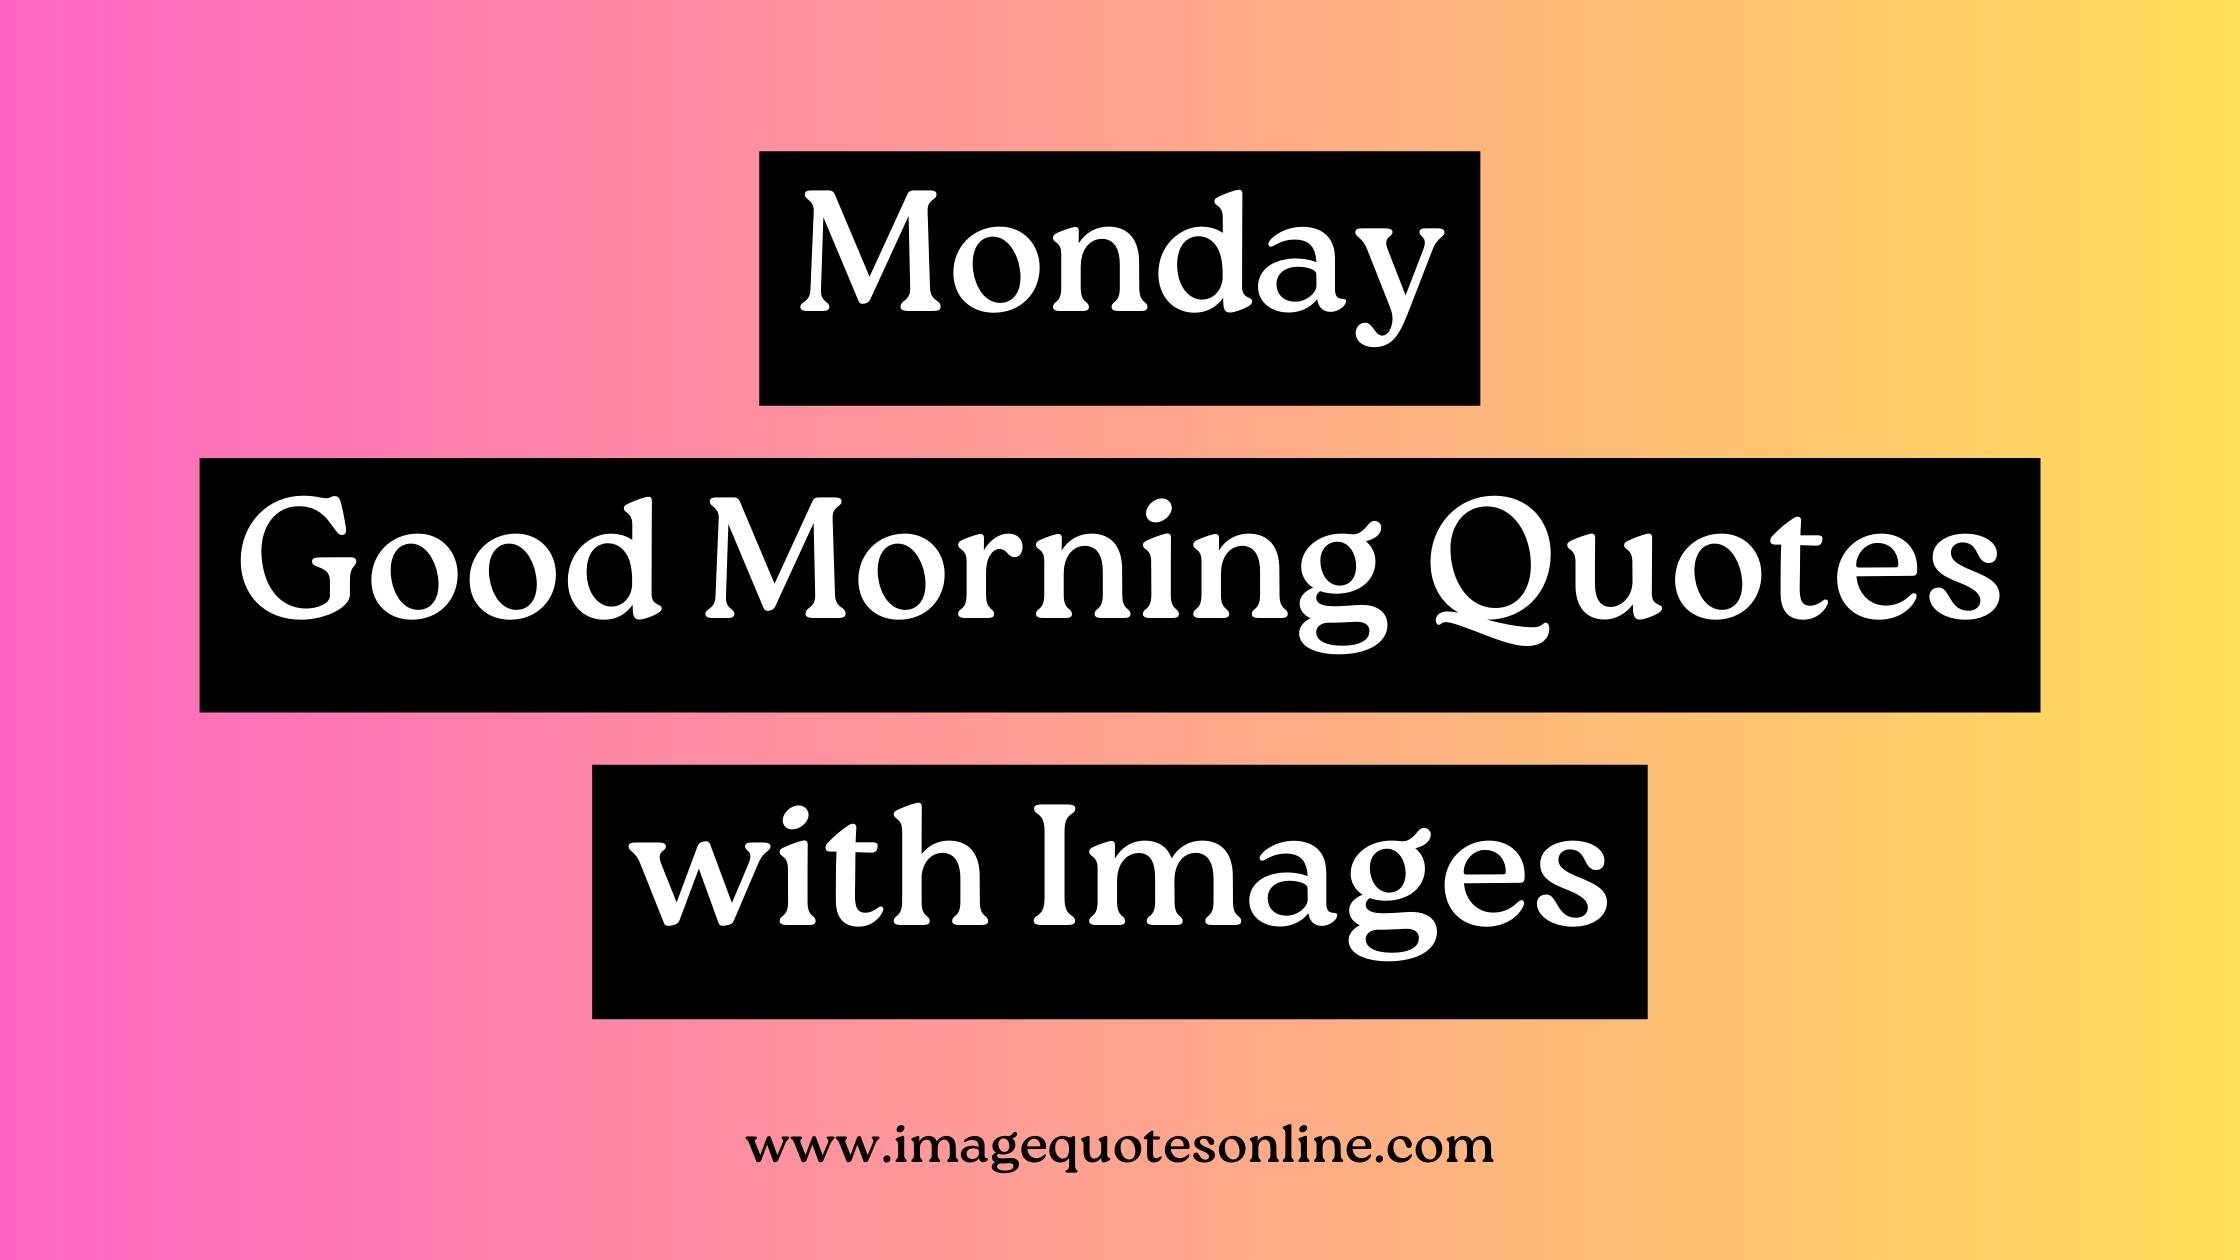 good morning monday images and quotes